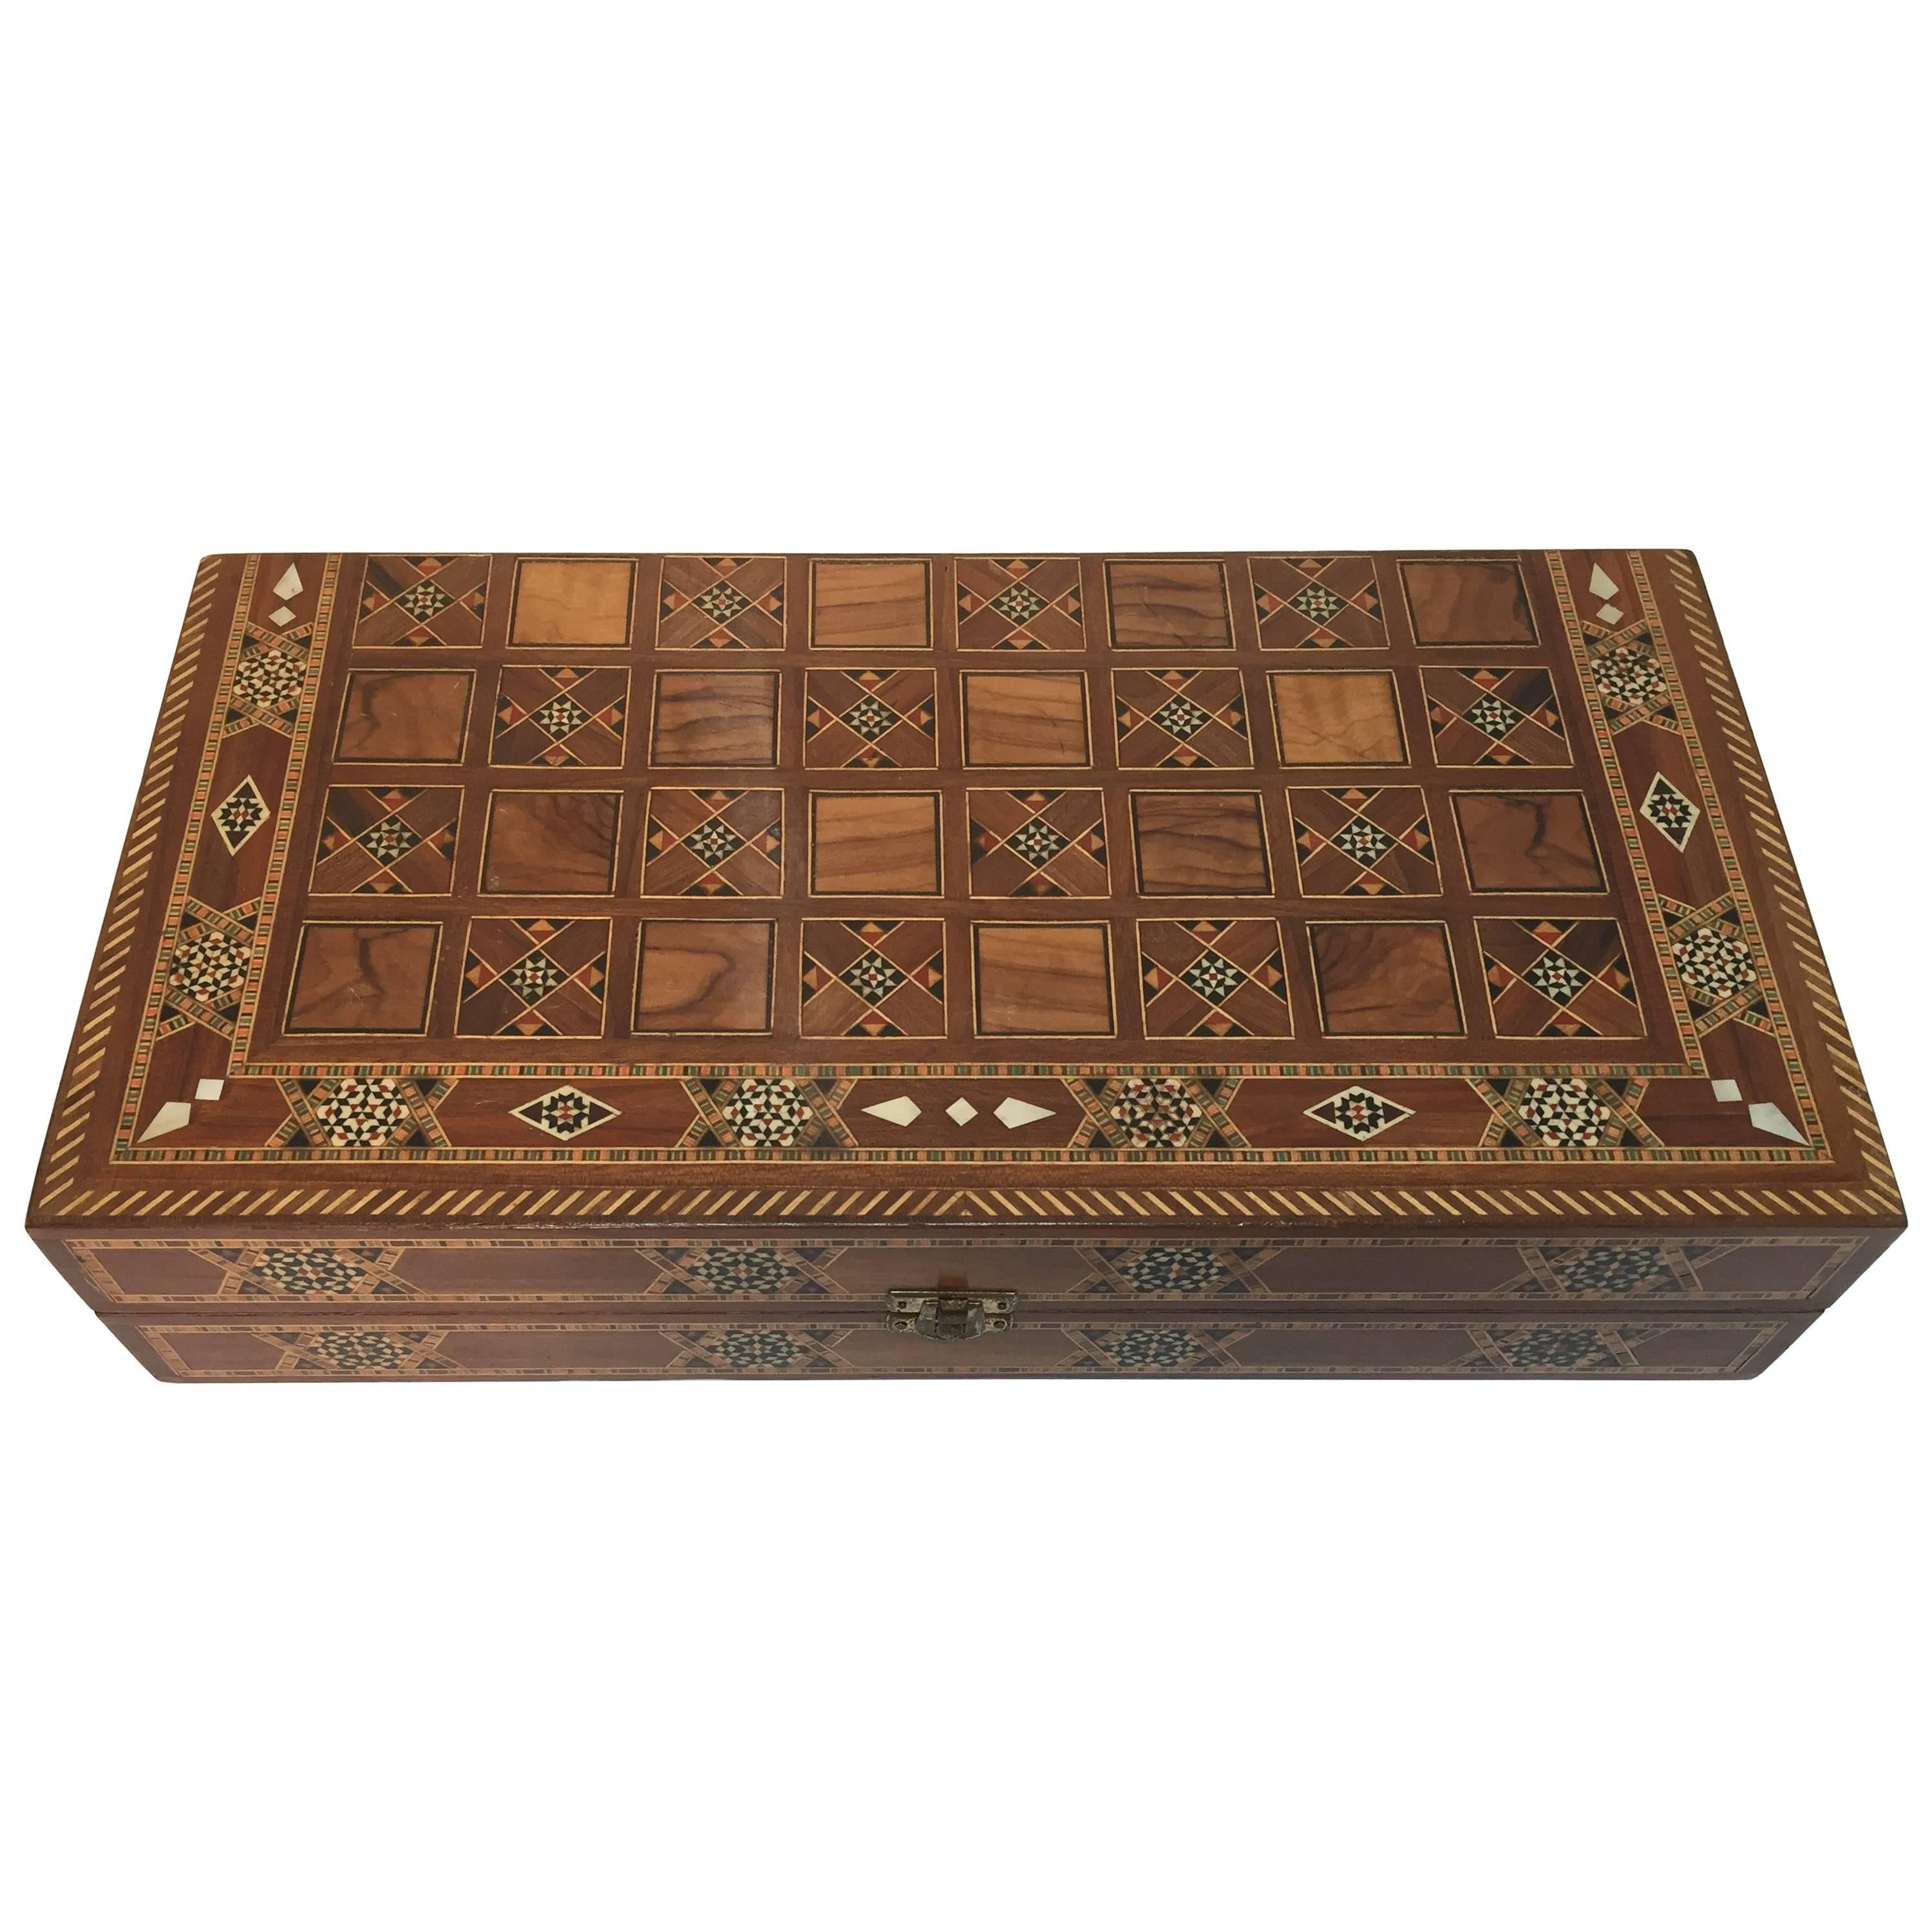 Mosaic Syrian Backgammon and Chess Wooden Inlaid Marquetry Box Game